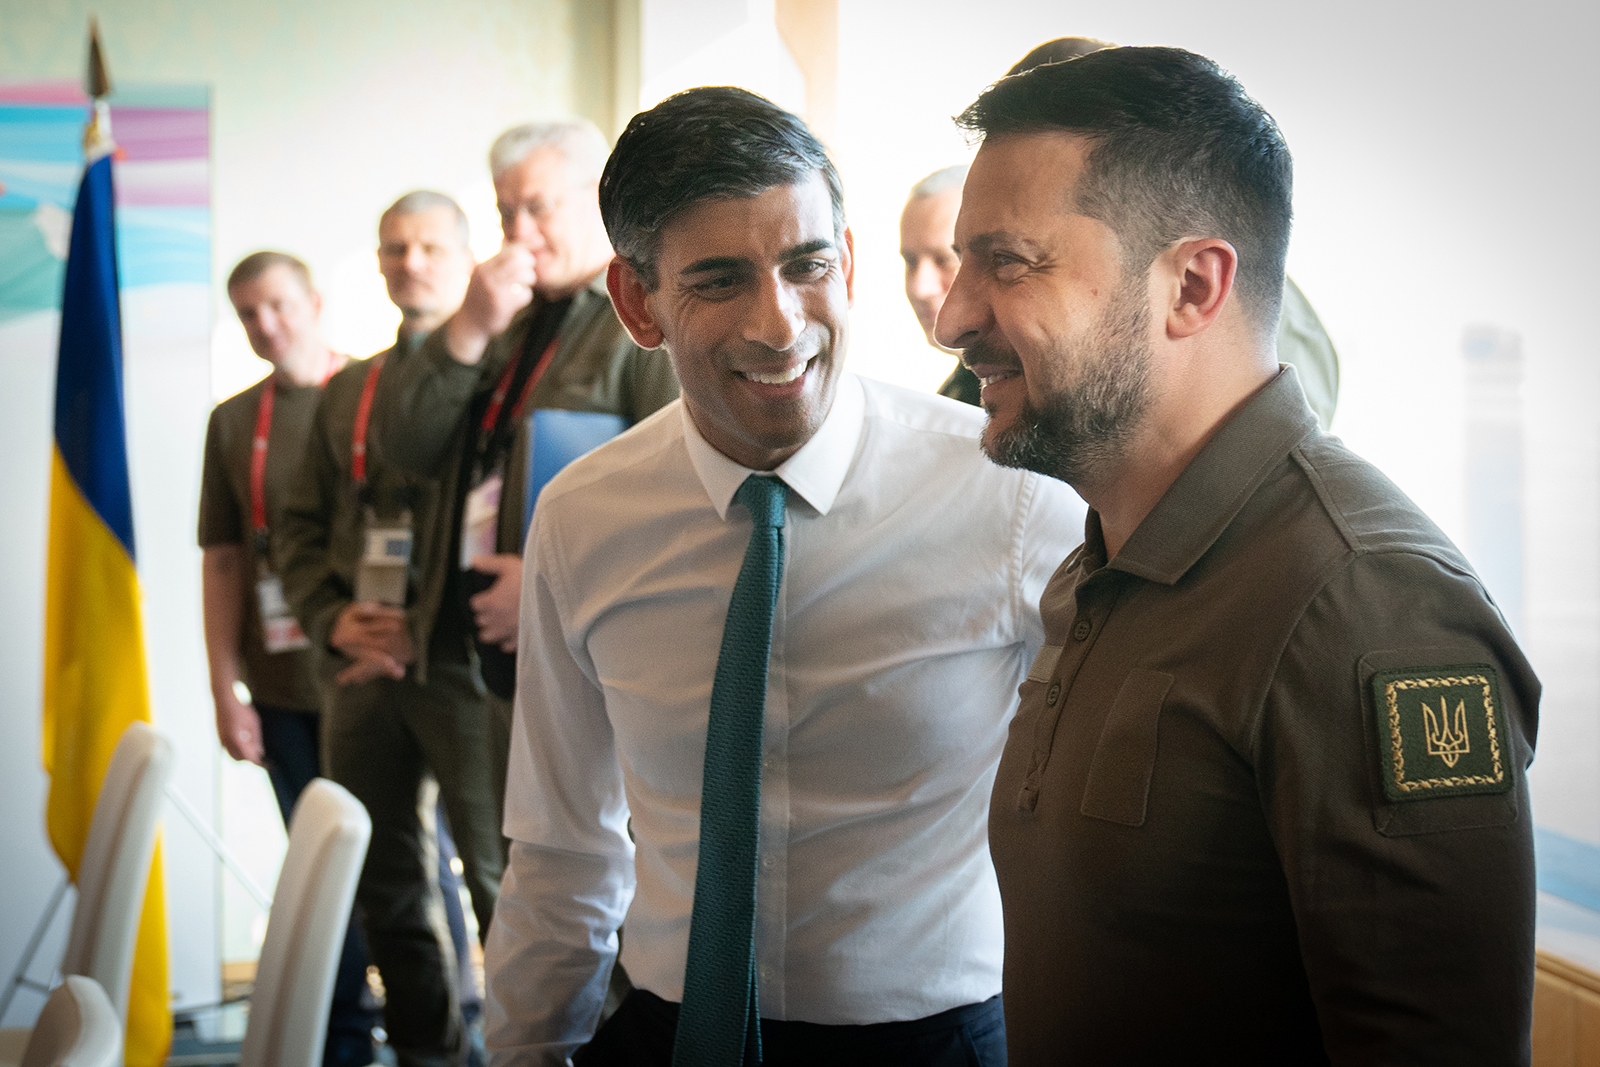 HIROSHIMA, JAPAN - MAY 20: British Prime Minister Rishi Sunak meets Ukraine President, Volodymyr Zelenskyy during the G7 Summit at the Grand Prince Hotel on May 20, 2023 in Hiroshima, Japan. (Photo by Stefan Rousseau - WPA Pool/Getty Images)

British Prime Minister Rishi Sunak meets with Ukrainian President Volodymyr Zelensky during the G7 Summit in Hiroshima, Japan, on May 20. Stefan Rousseau/WPA Pool/Getty Images